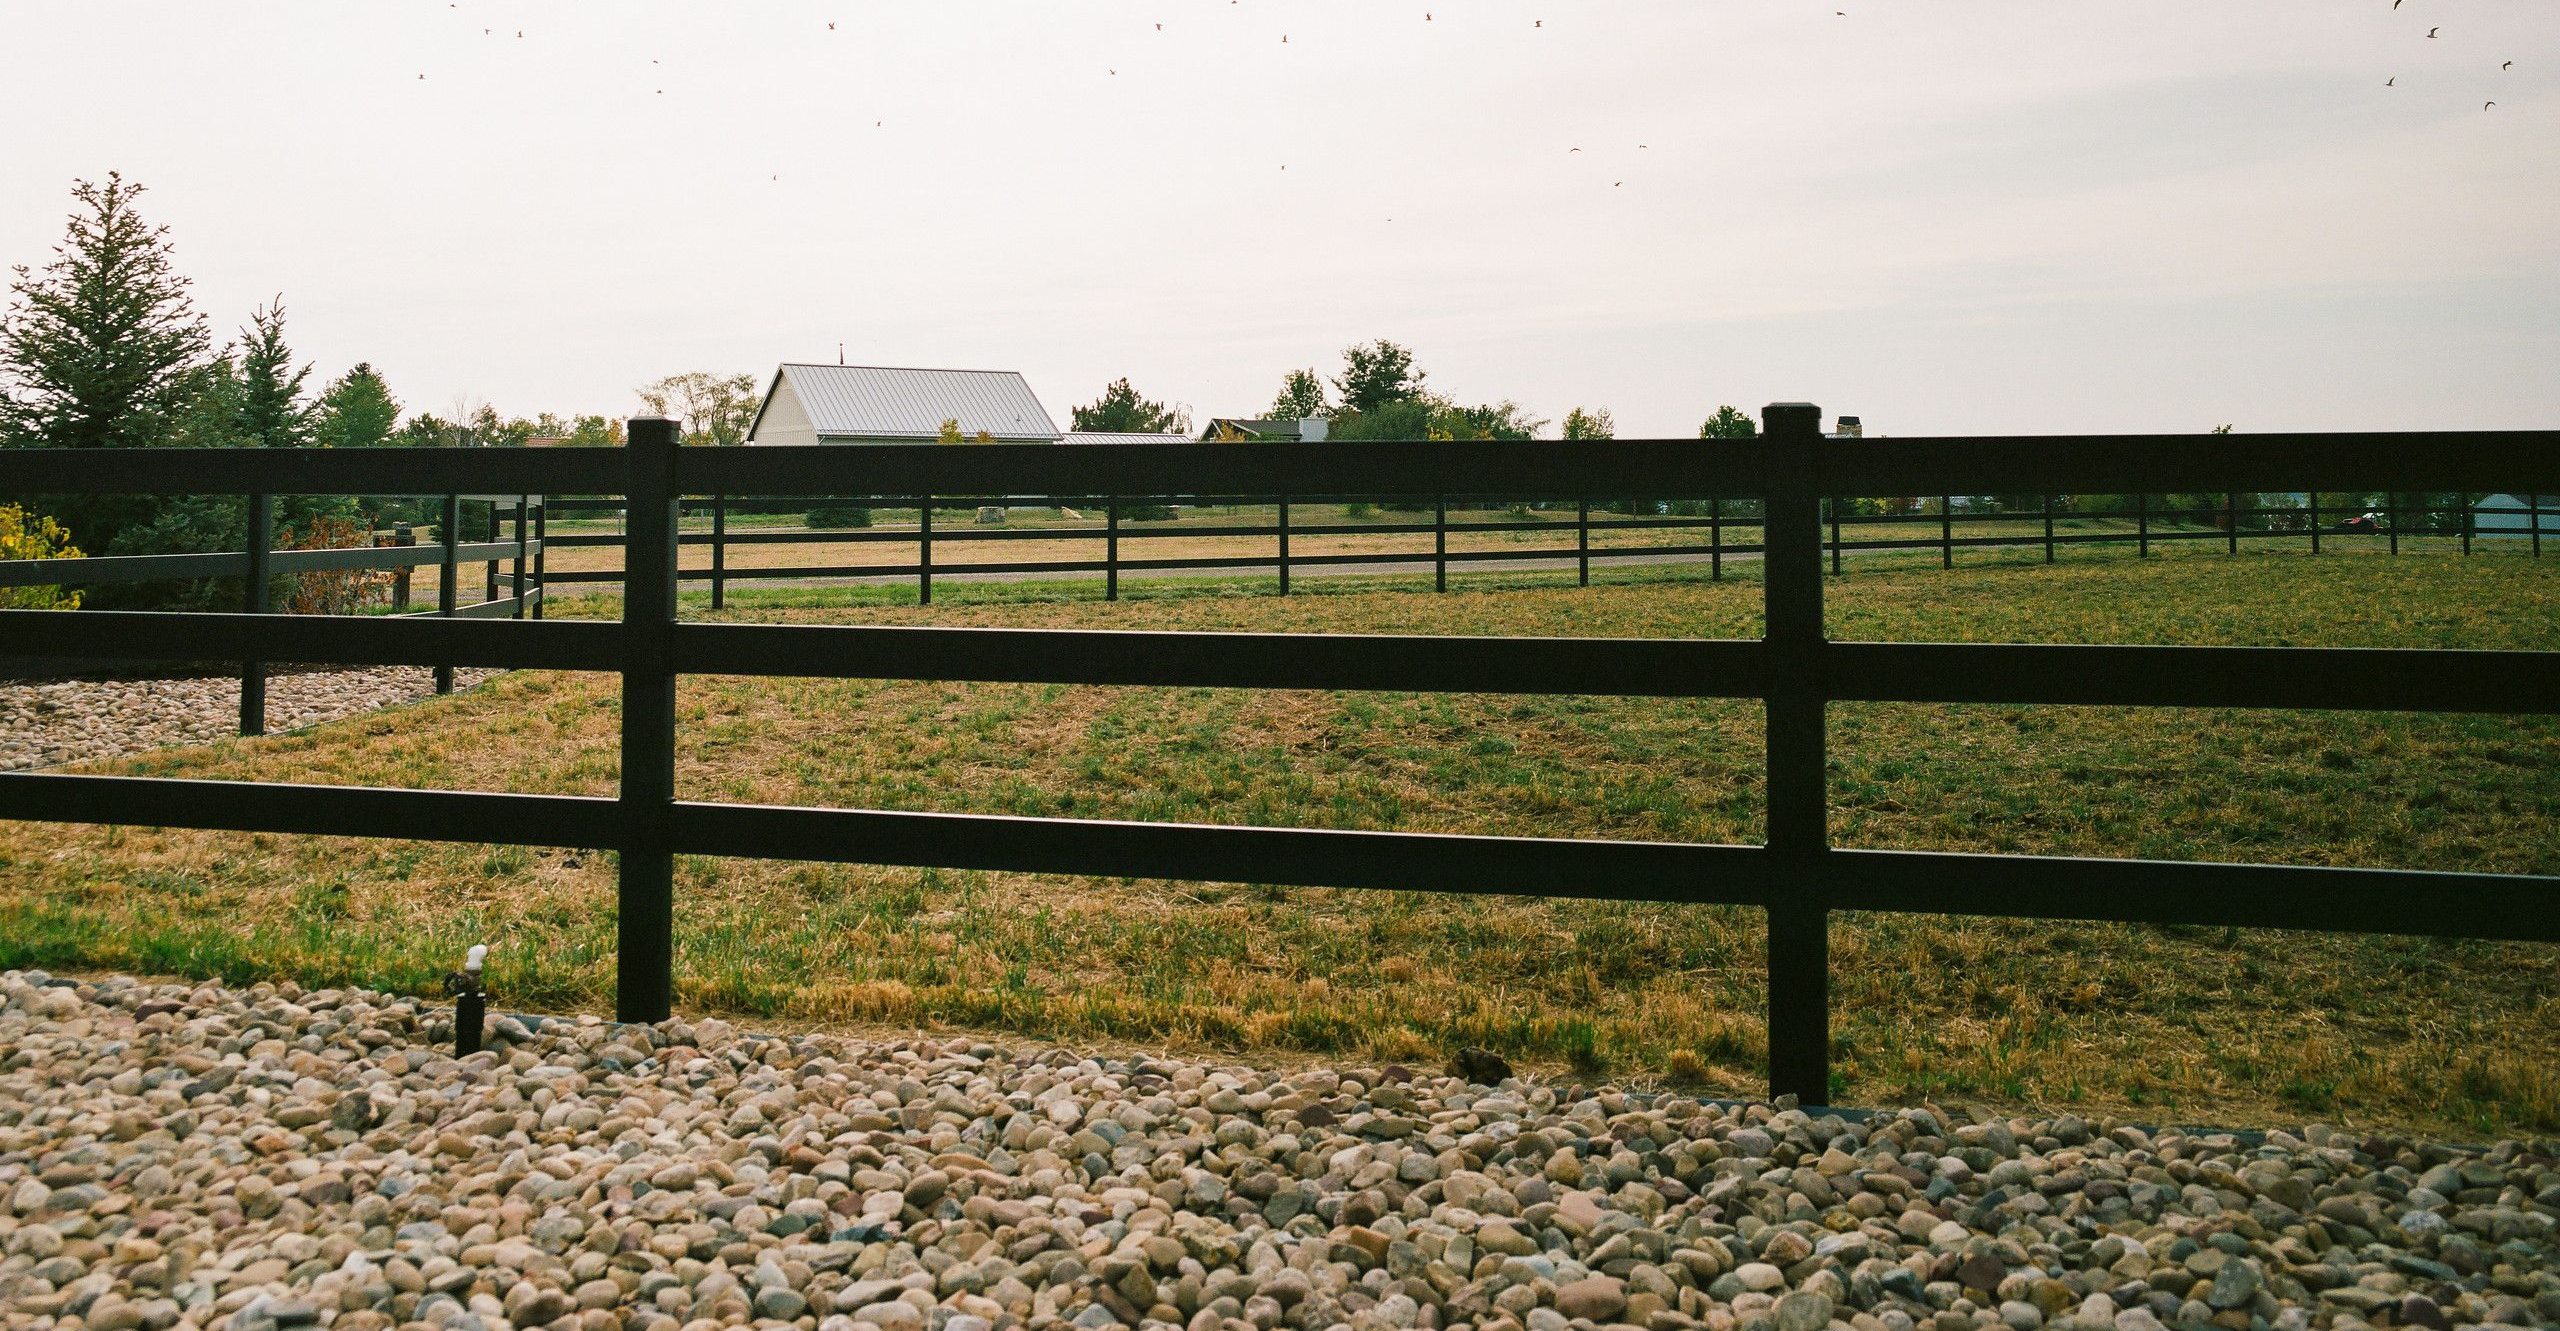 The Best Type of Fencing for Your Horses